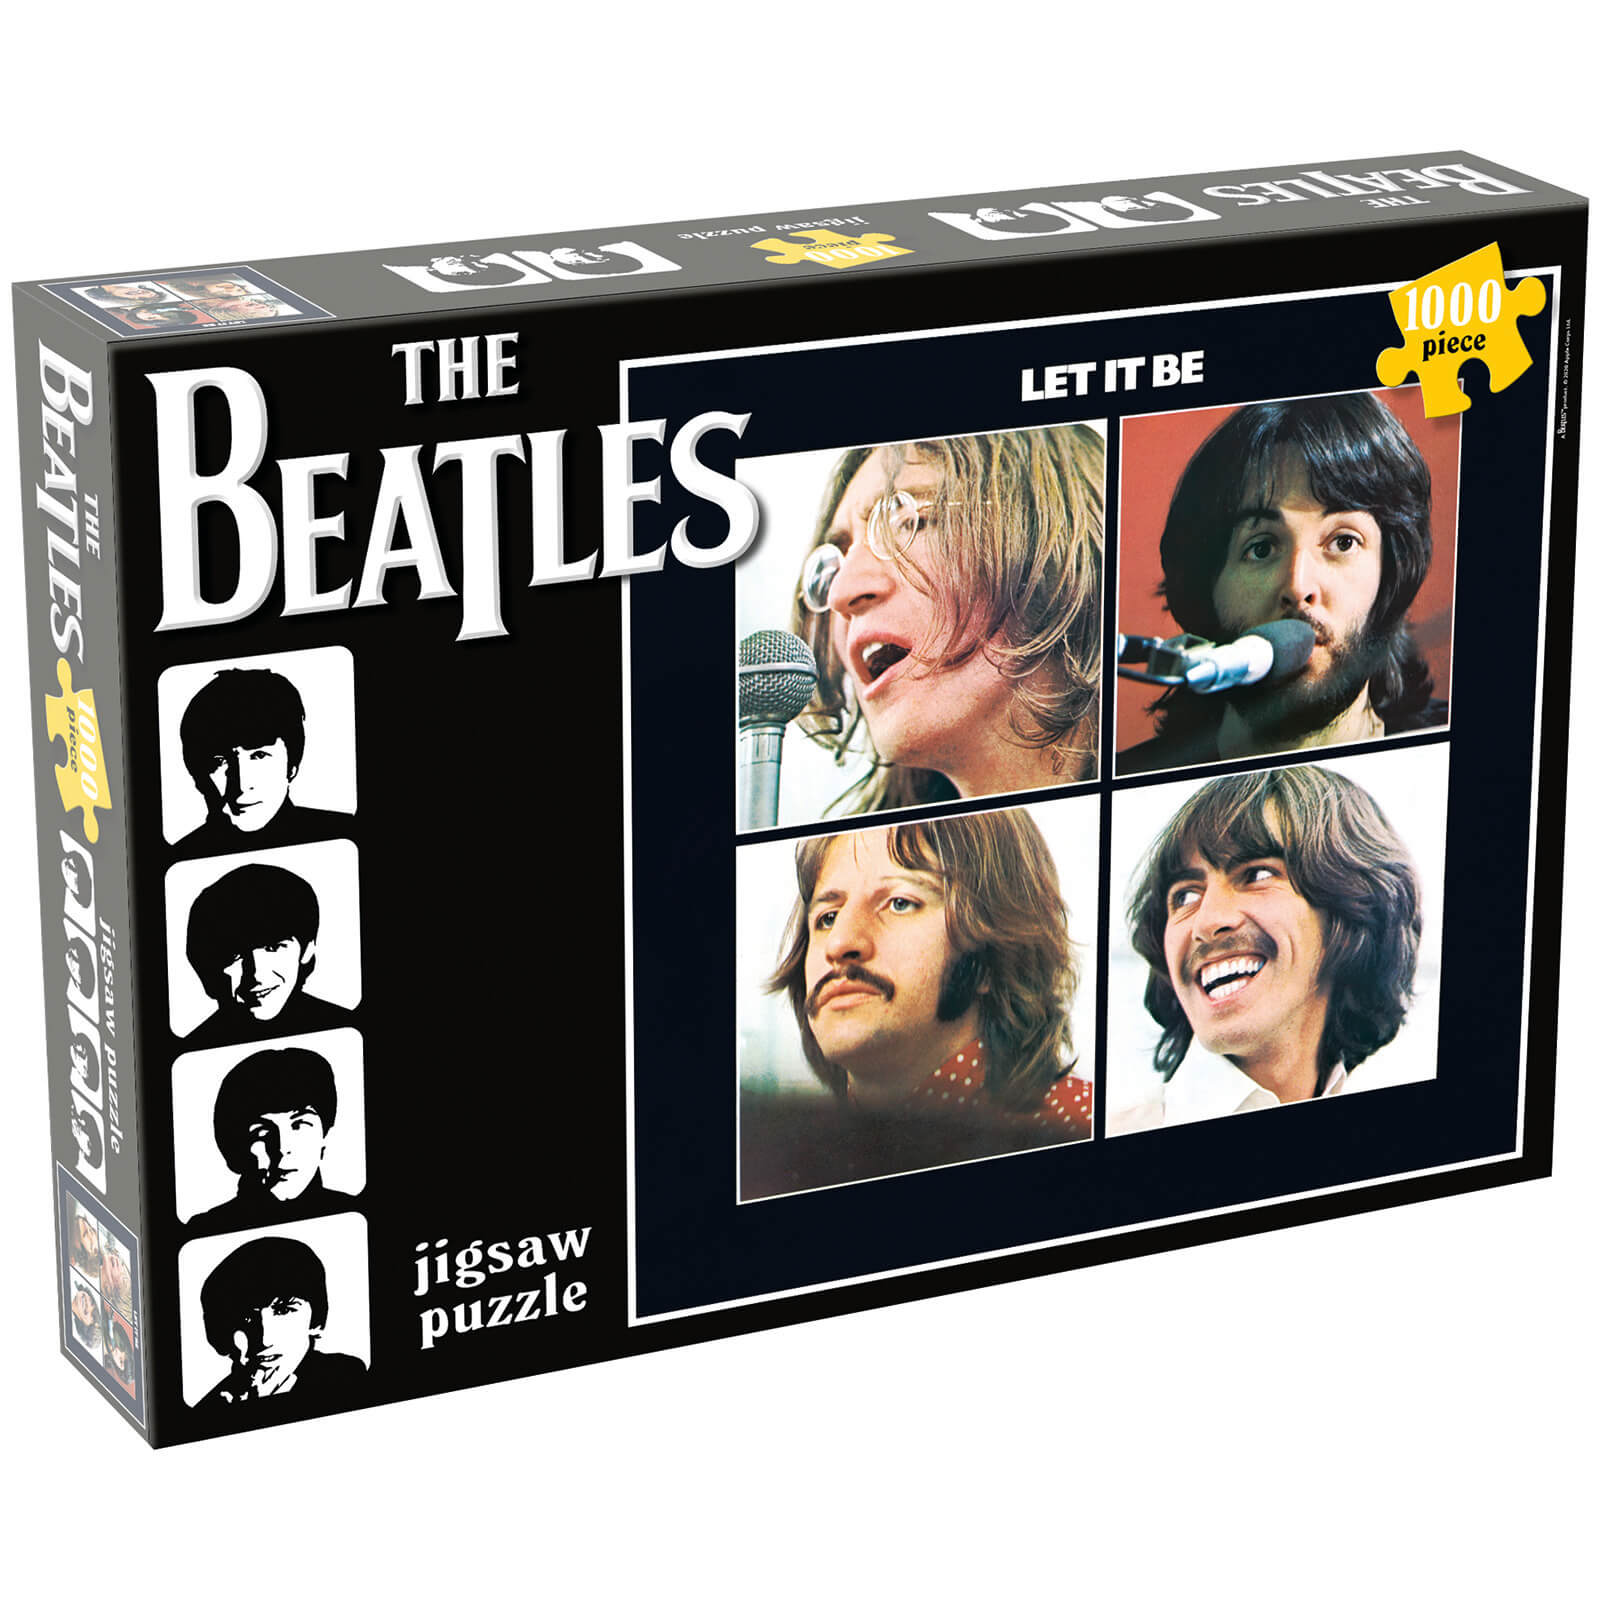 The Beatles Let It Be Jigsaw Puzzle (1000 Pieces)